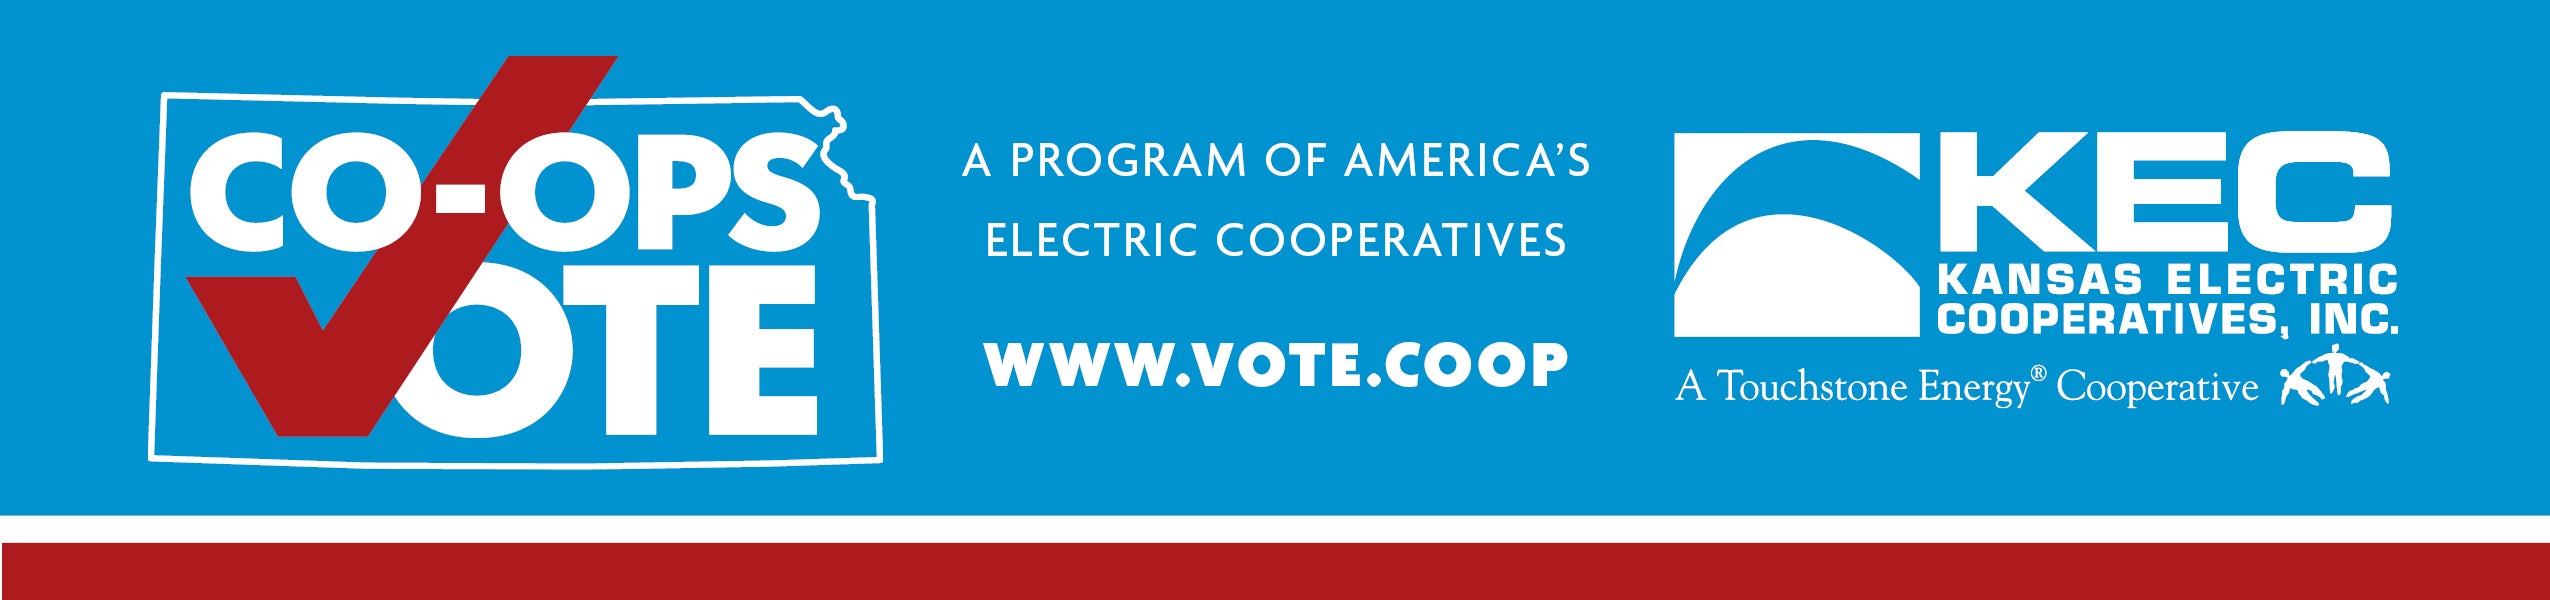 Co-ops Vote Logo and Header